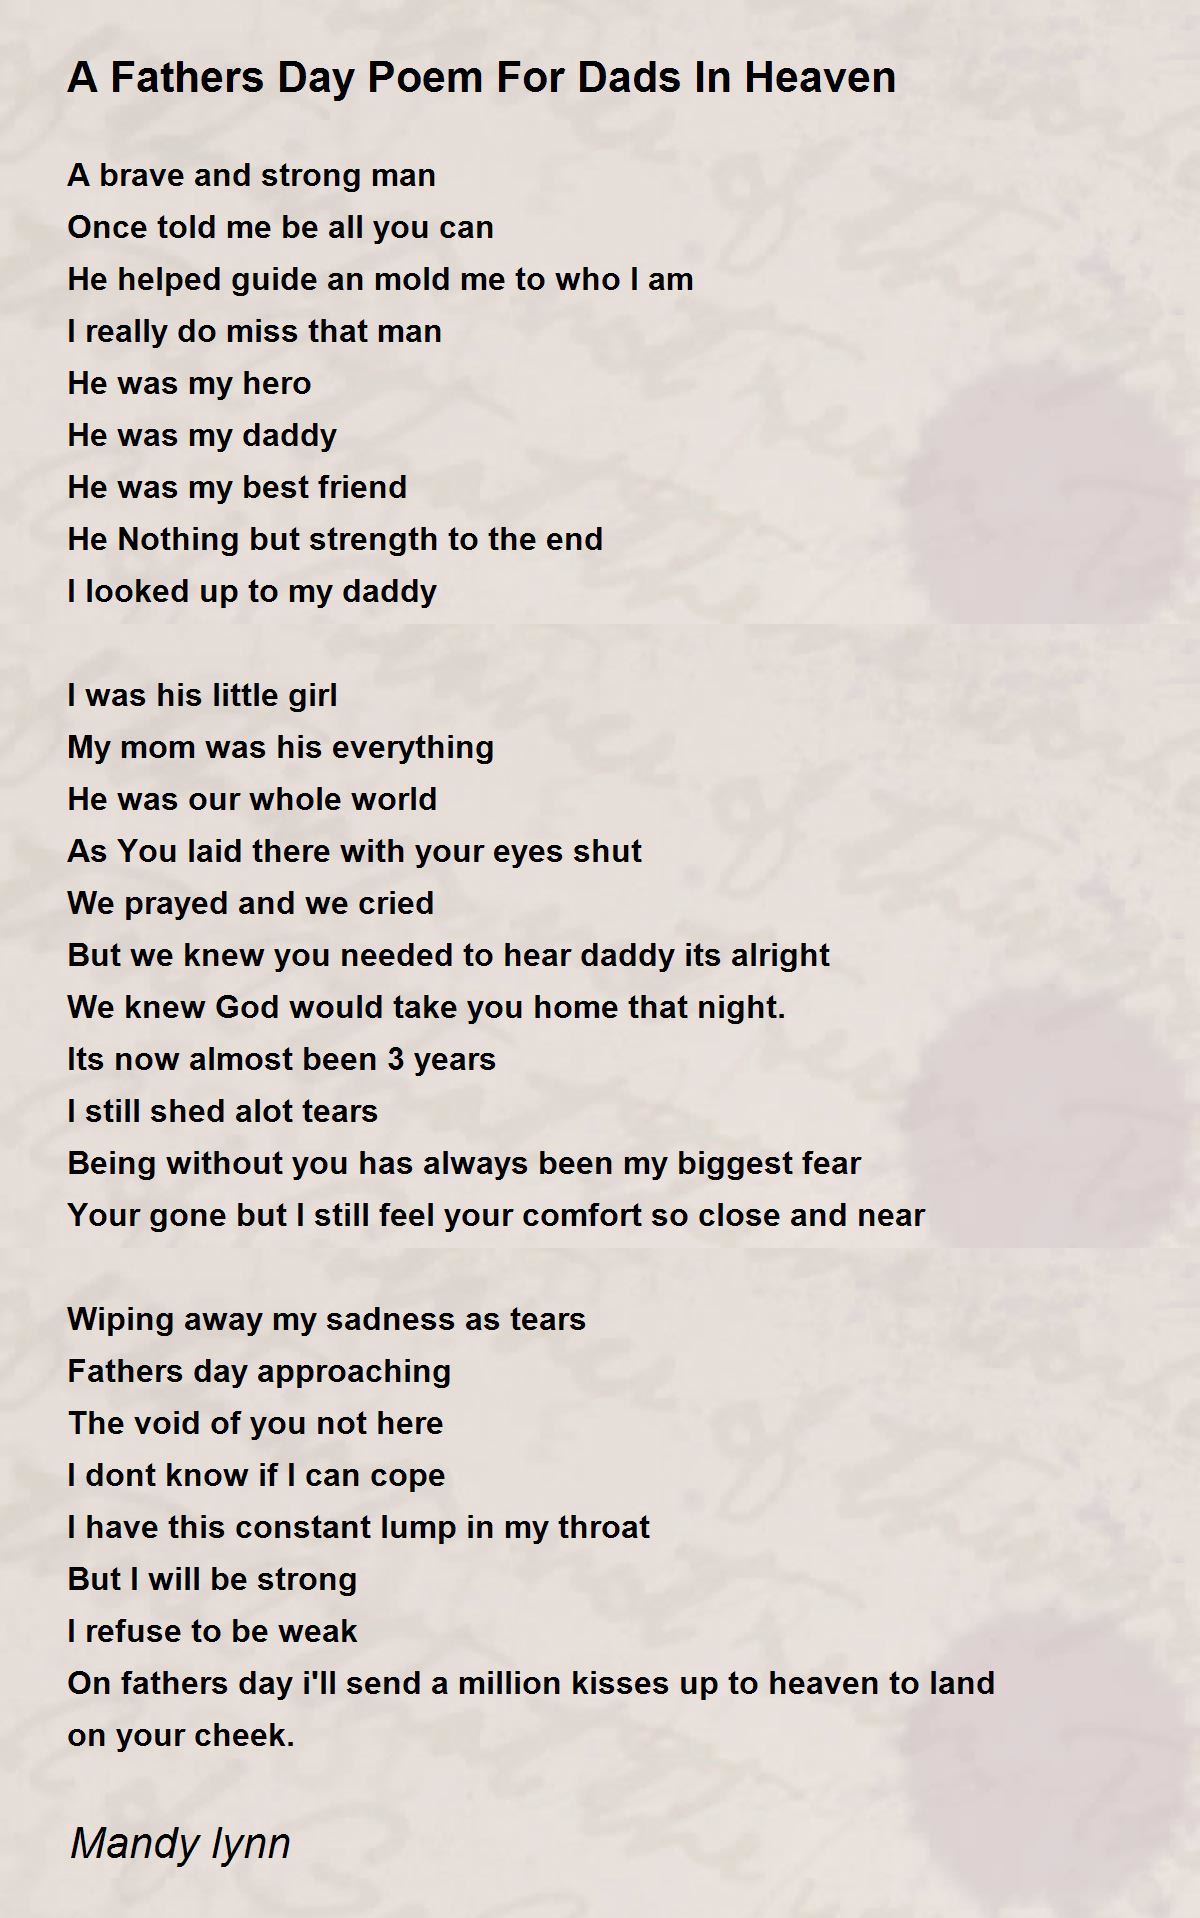 A Fathers Day Poem For Dads In Heaven Poem By Mandy Lynn Poem Hunter